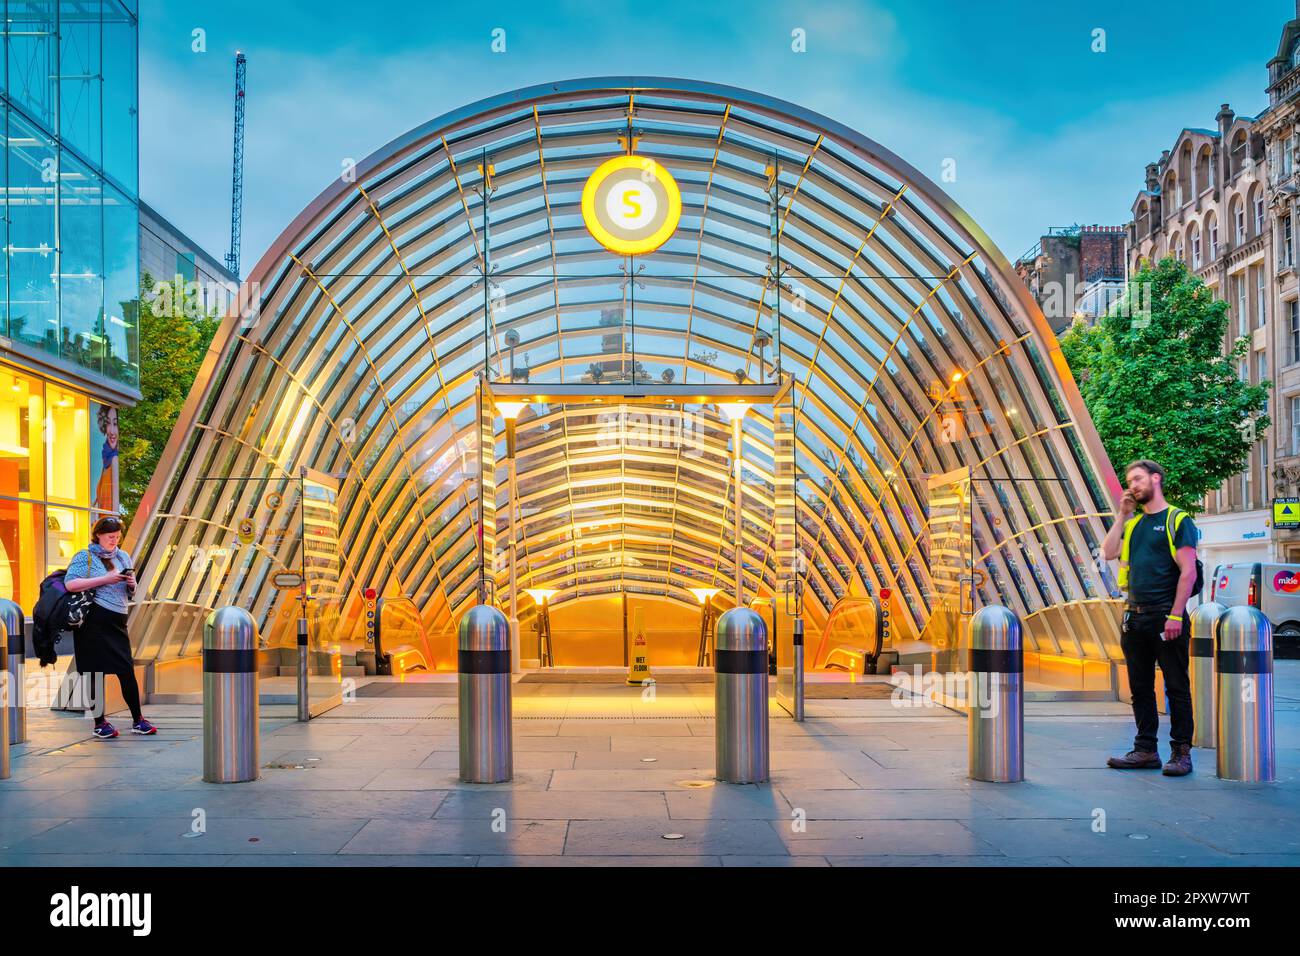 St Enoch subway station entrance in downtown Glasgow, Scotland at night. Stock Photo